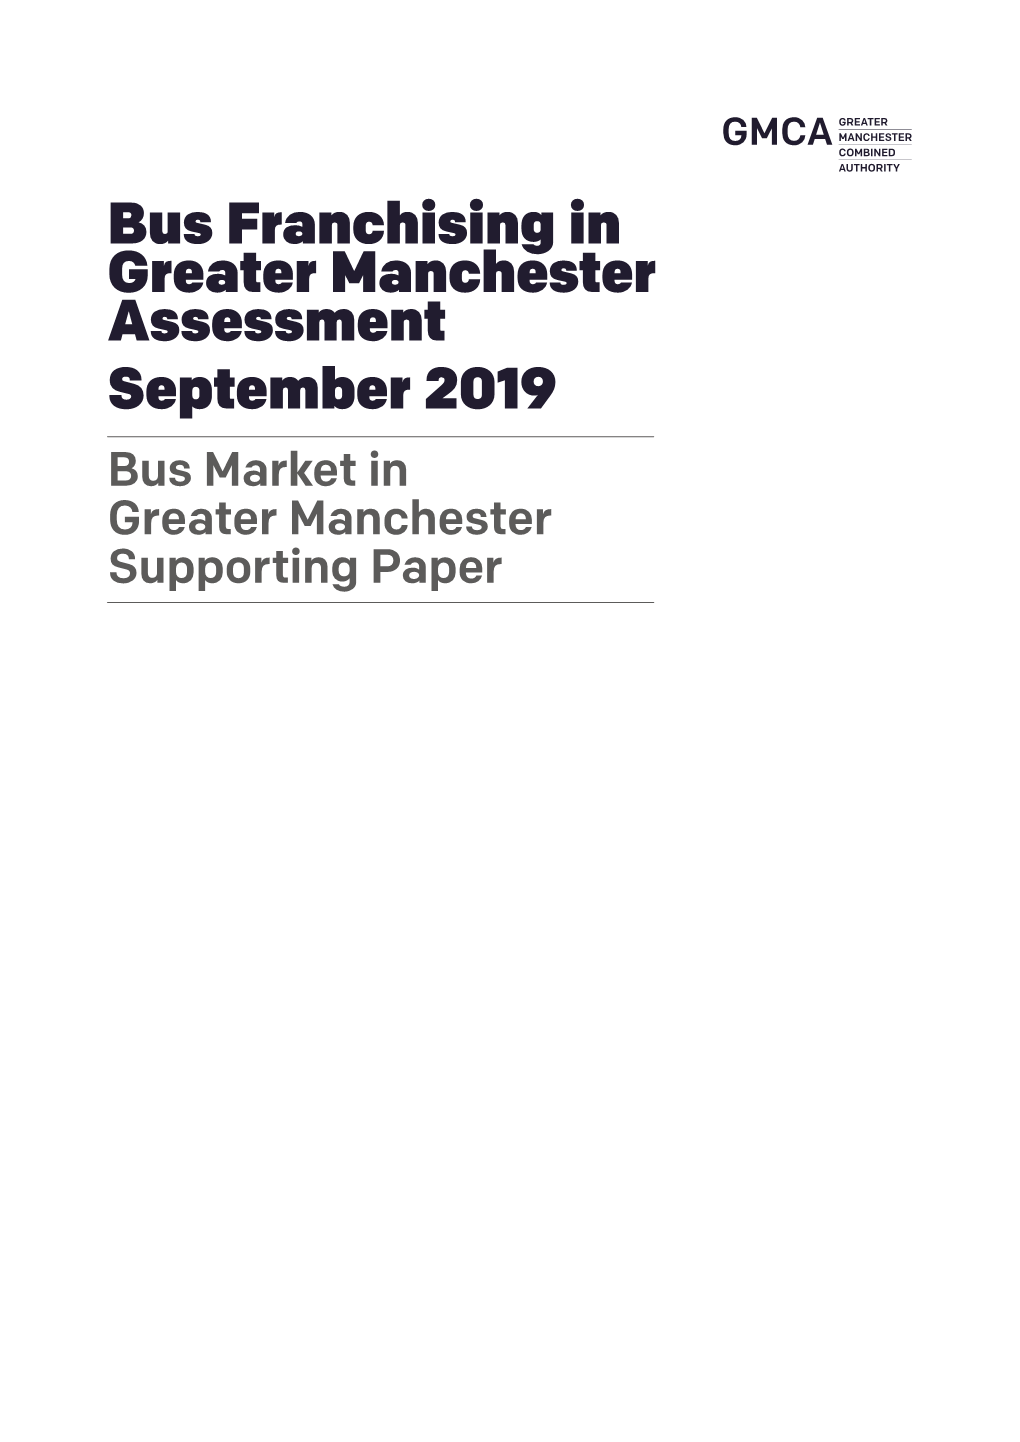 Bus Market in Greater Manchester Supporting Paper